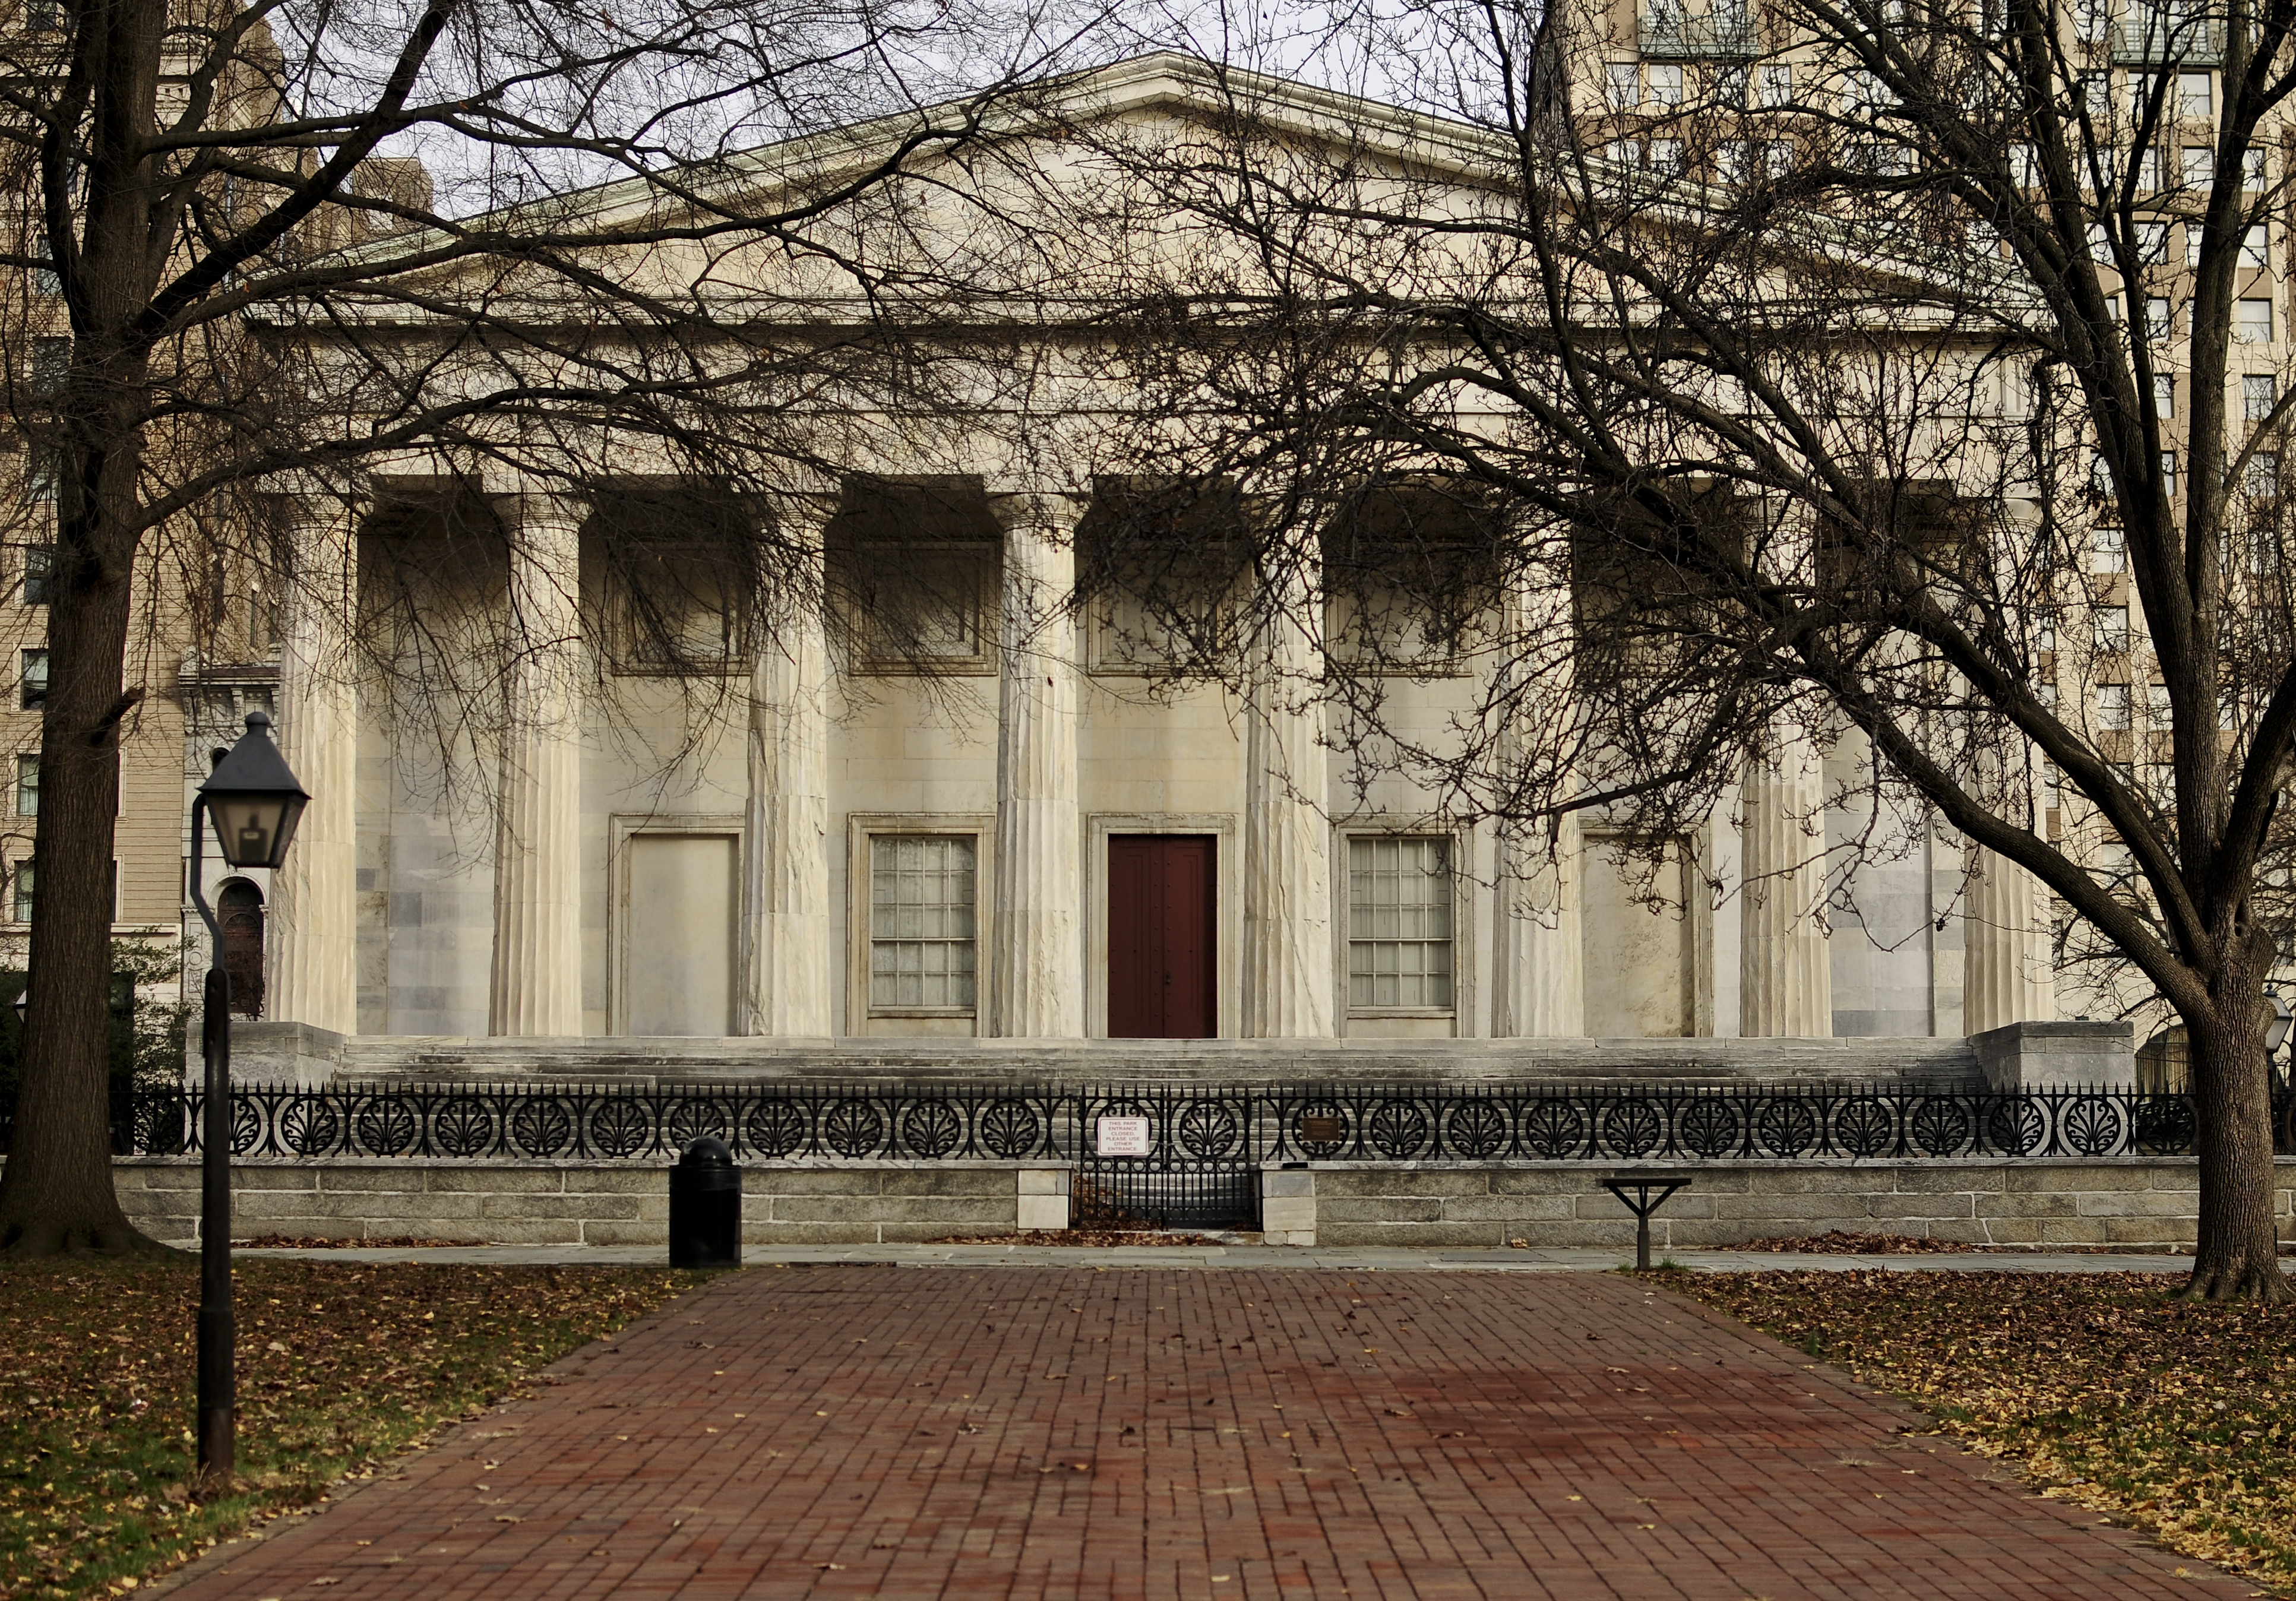 The exterior of the Second Bank of the United States showing a marble building with eight columns.